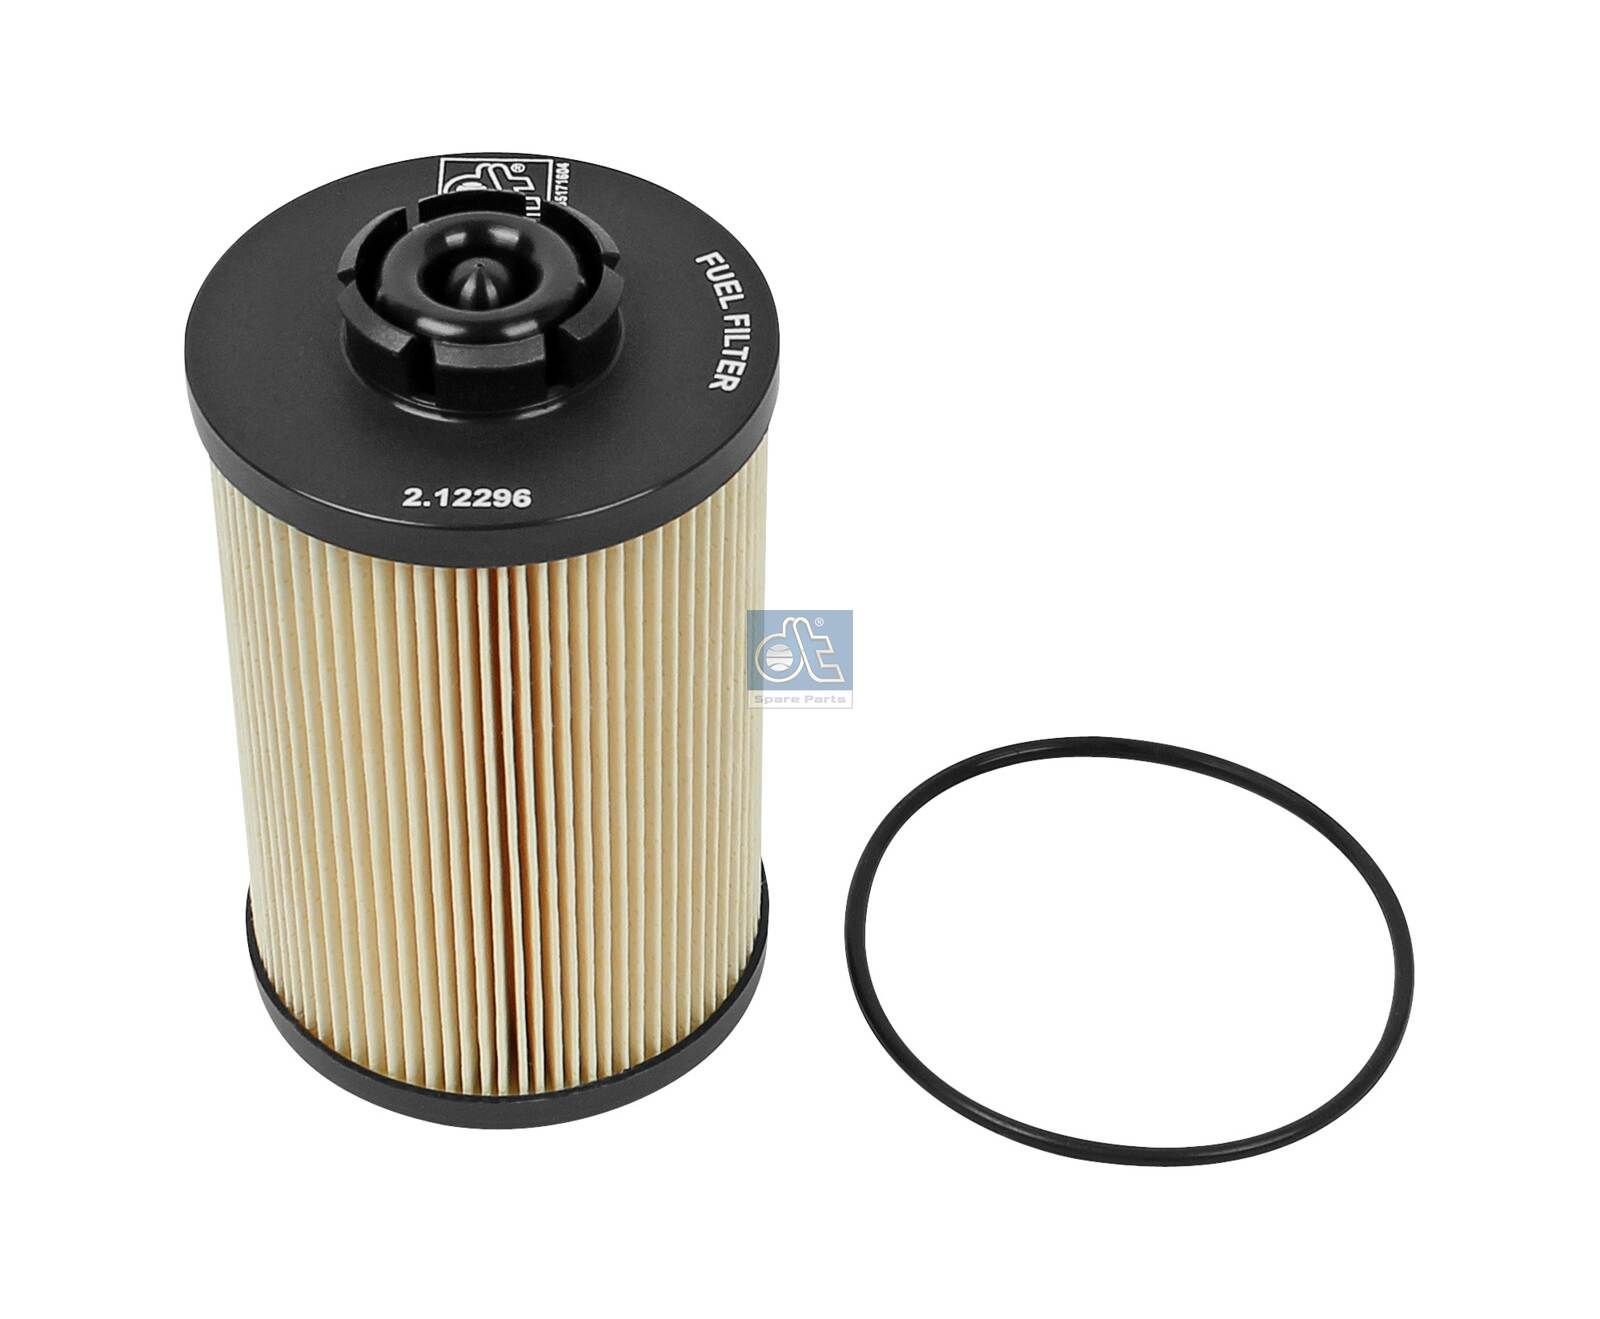 PU 1058X DT Spare Parts 2.12296 Fuel filter 20791147